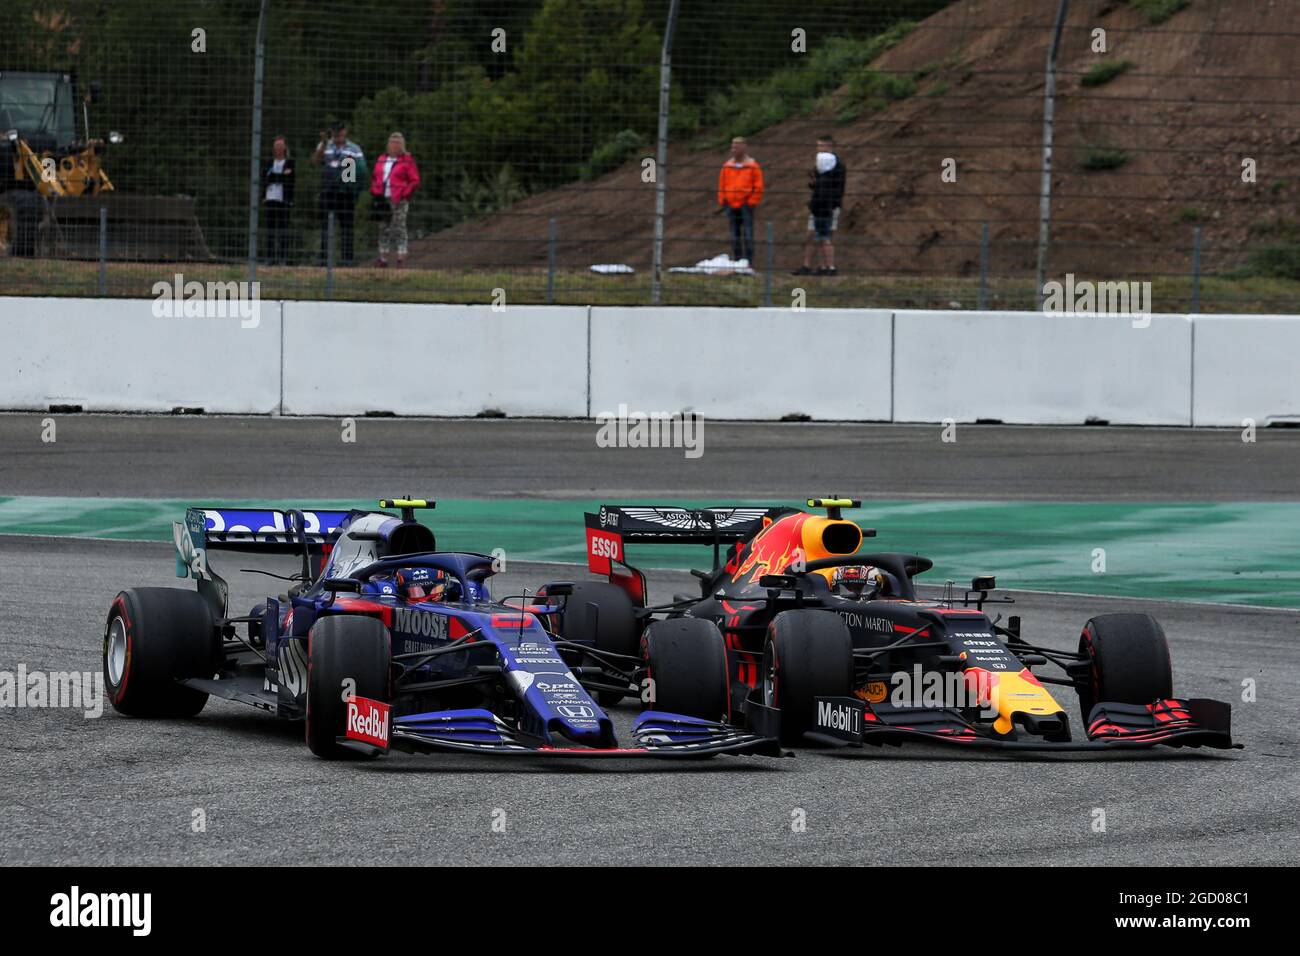 Alexander Albon (THA) Scuderia Toro Rosso and Pierre Gasly (FRA) Red Bull Racing RB15 for position. German Grand Prix, Sunday 28th July 2019. Hockenheim, Germany Stock Photo - Alamy